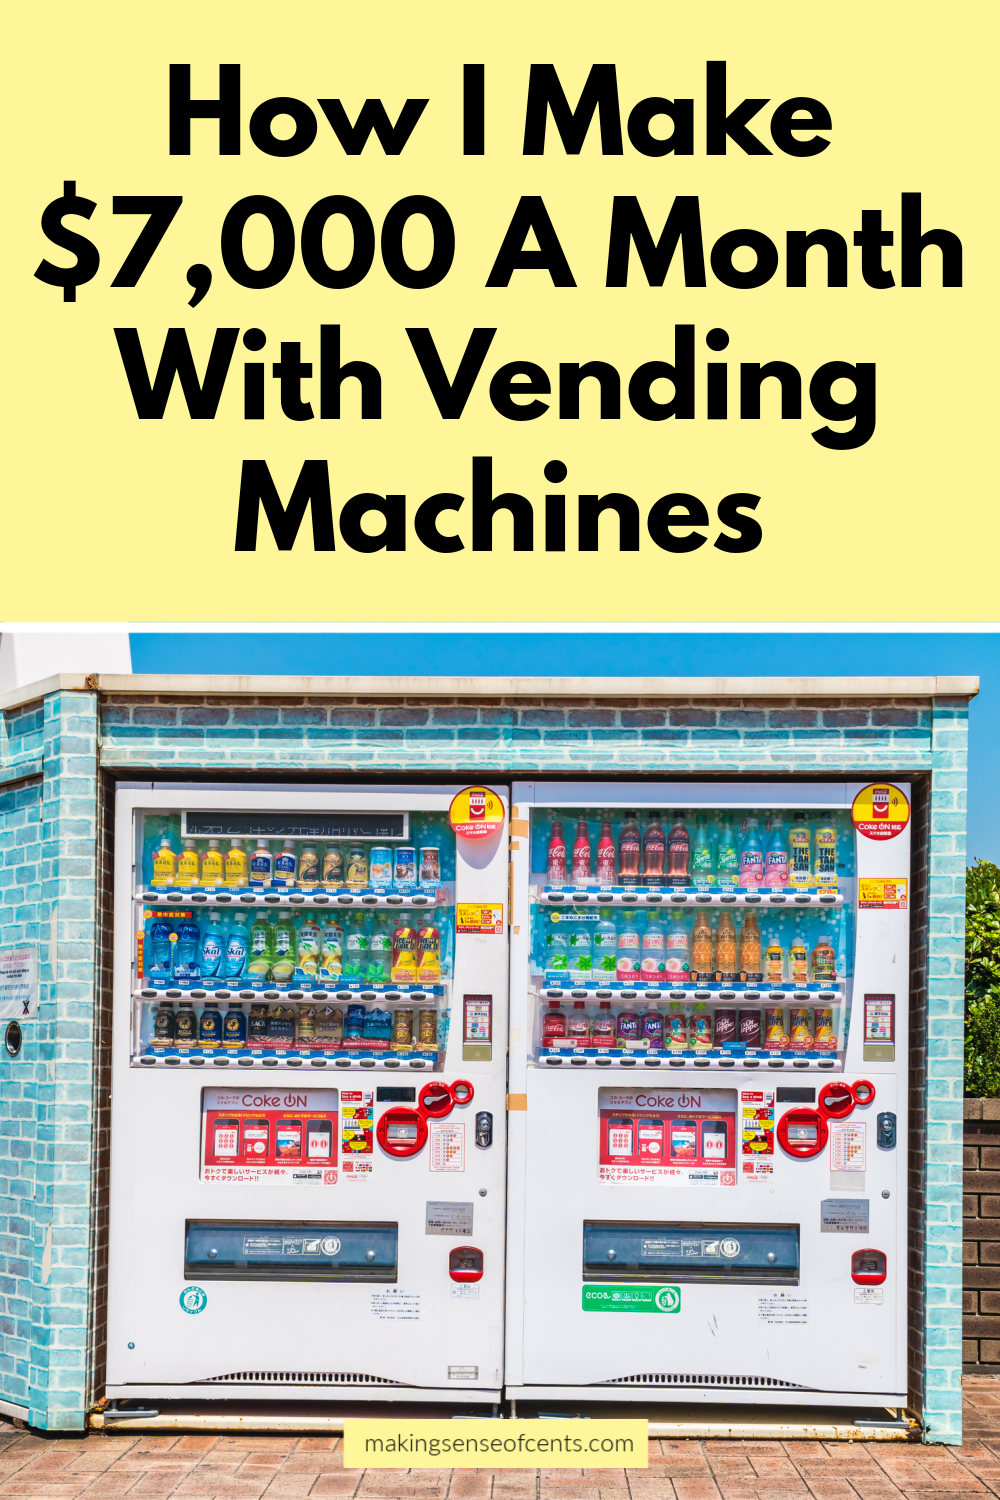 How To Start Vending Machine Business In Florida - Vending Business